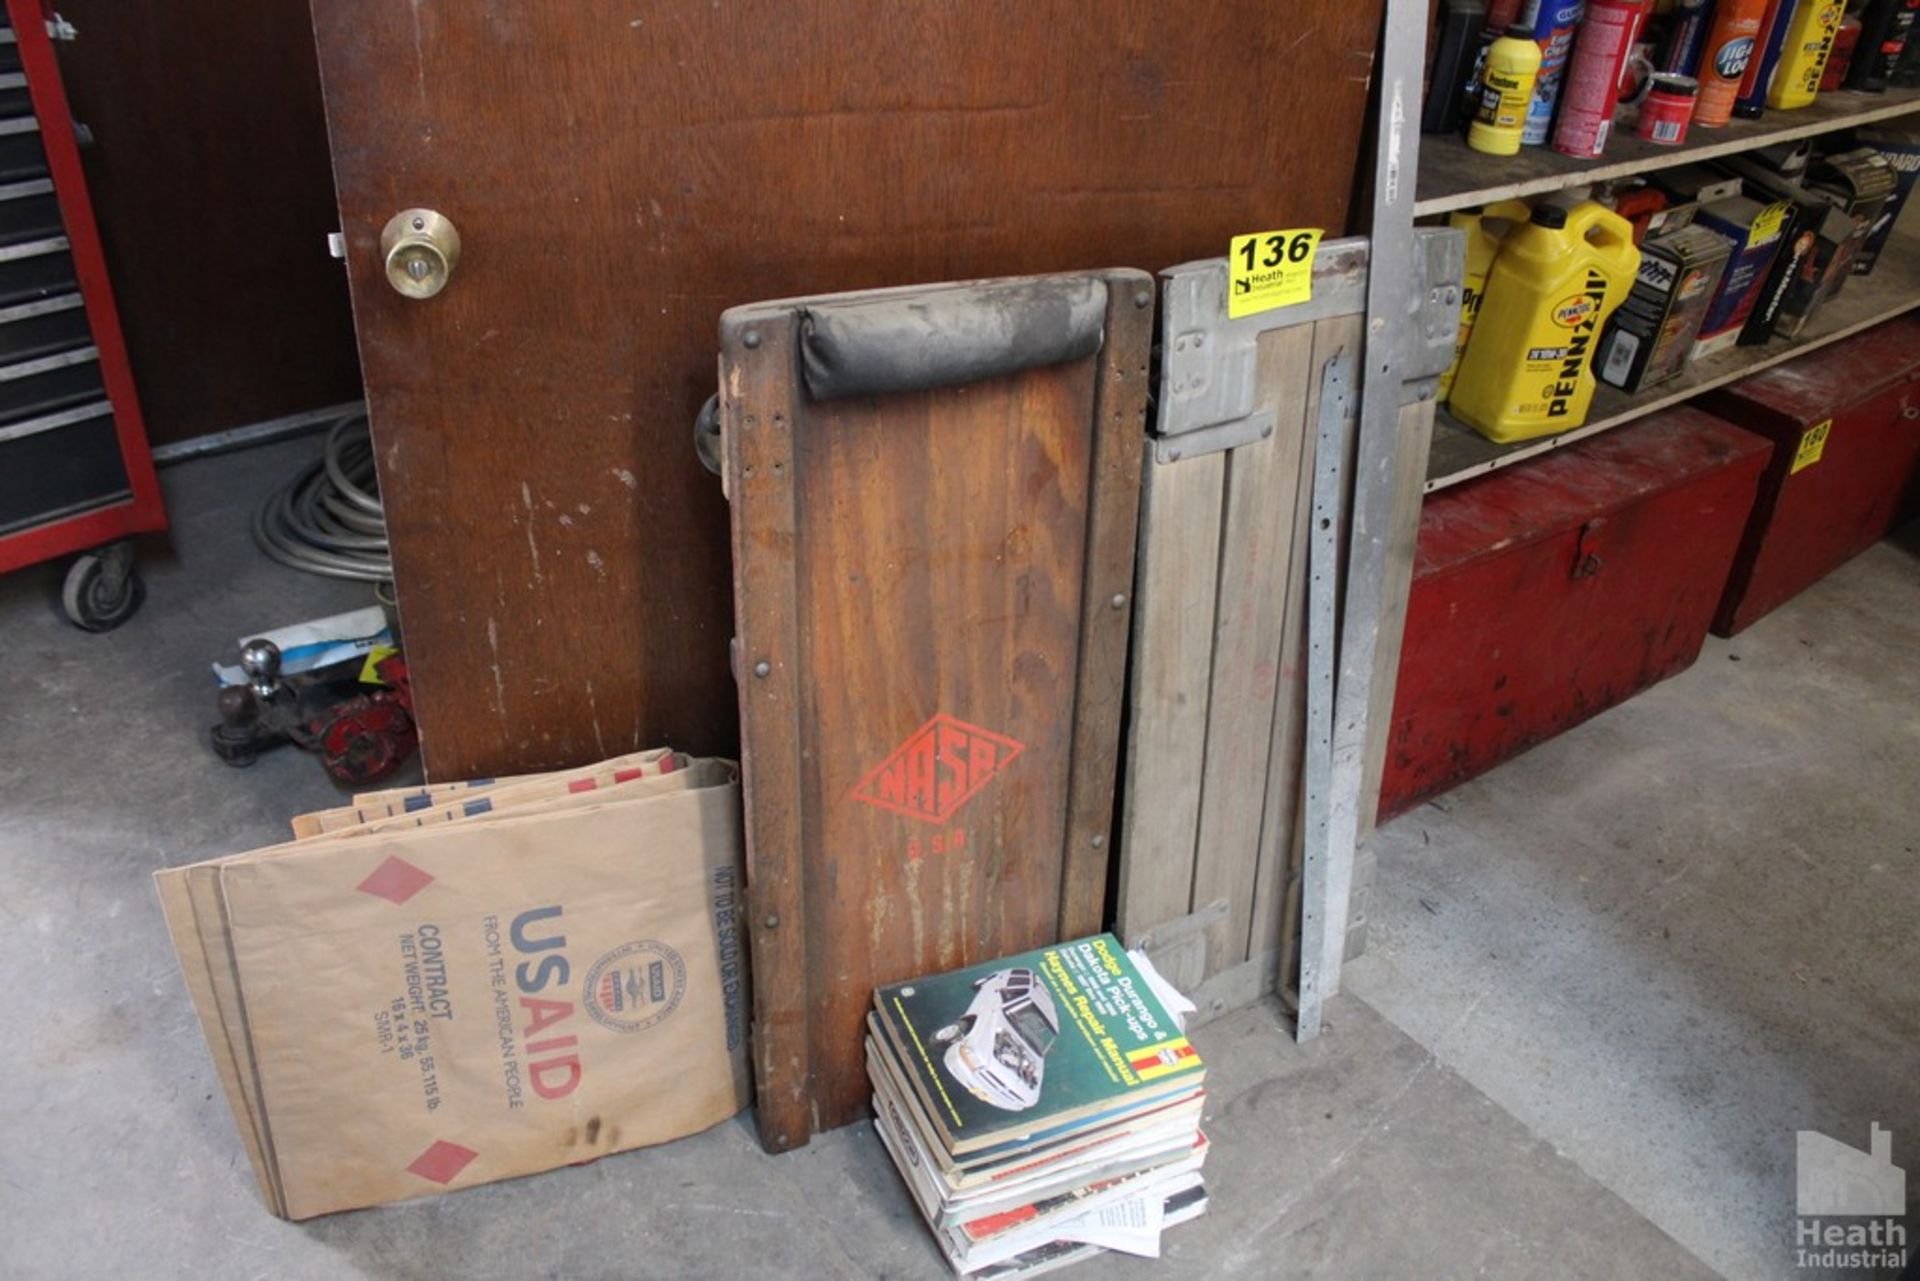 (2) AUTOMOTIVE CREEPERS AND ASSORTED REPAIR AND SERVICE BOOKS